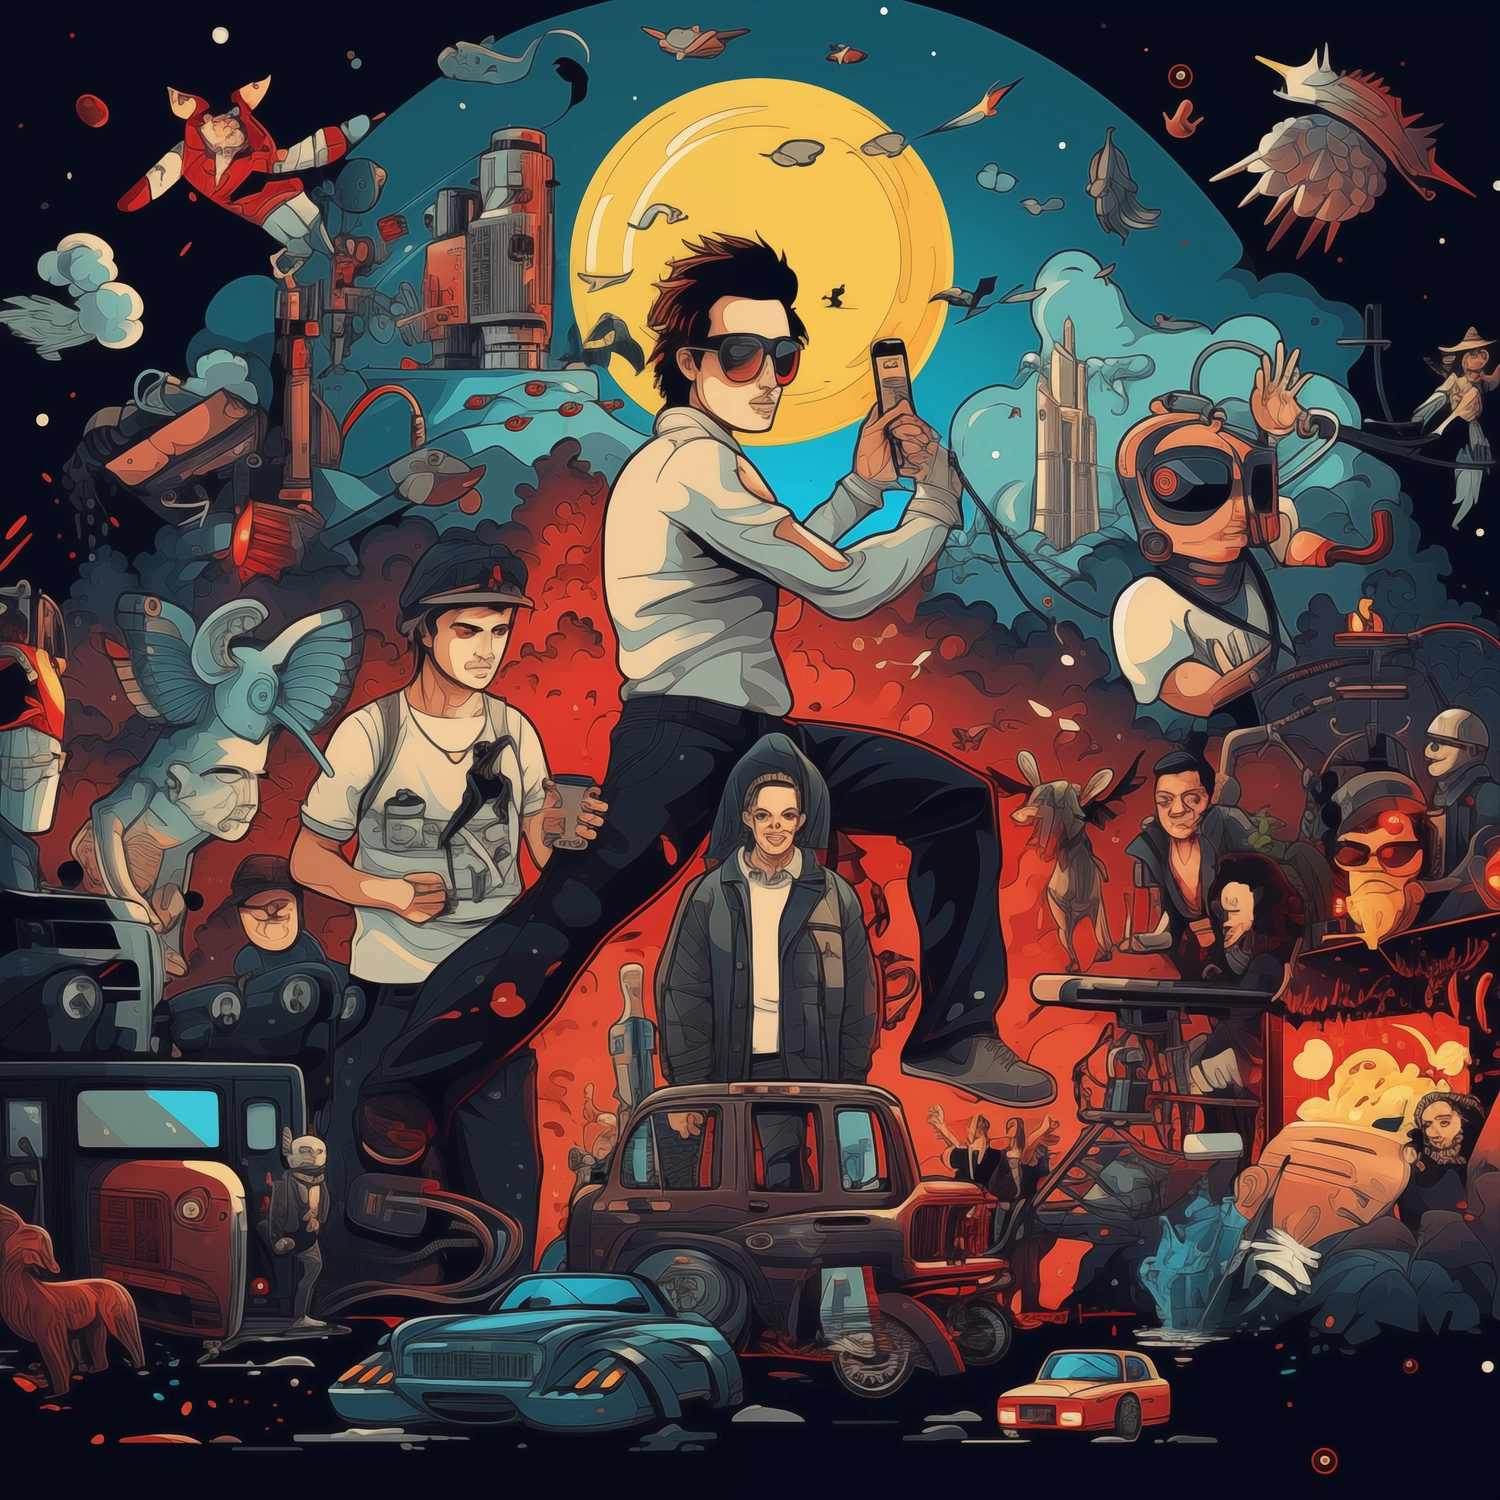 Animated graphic of a popular culture theme